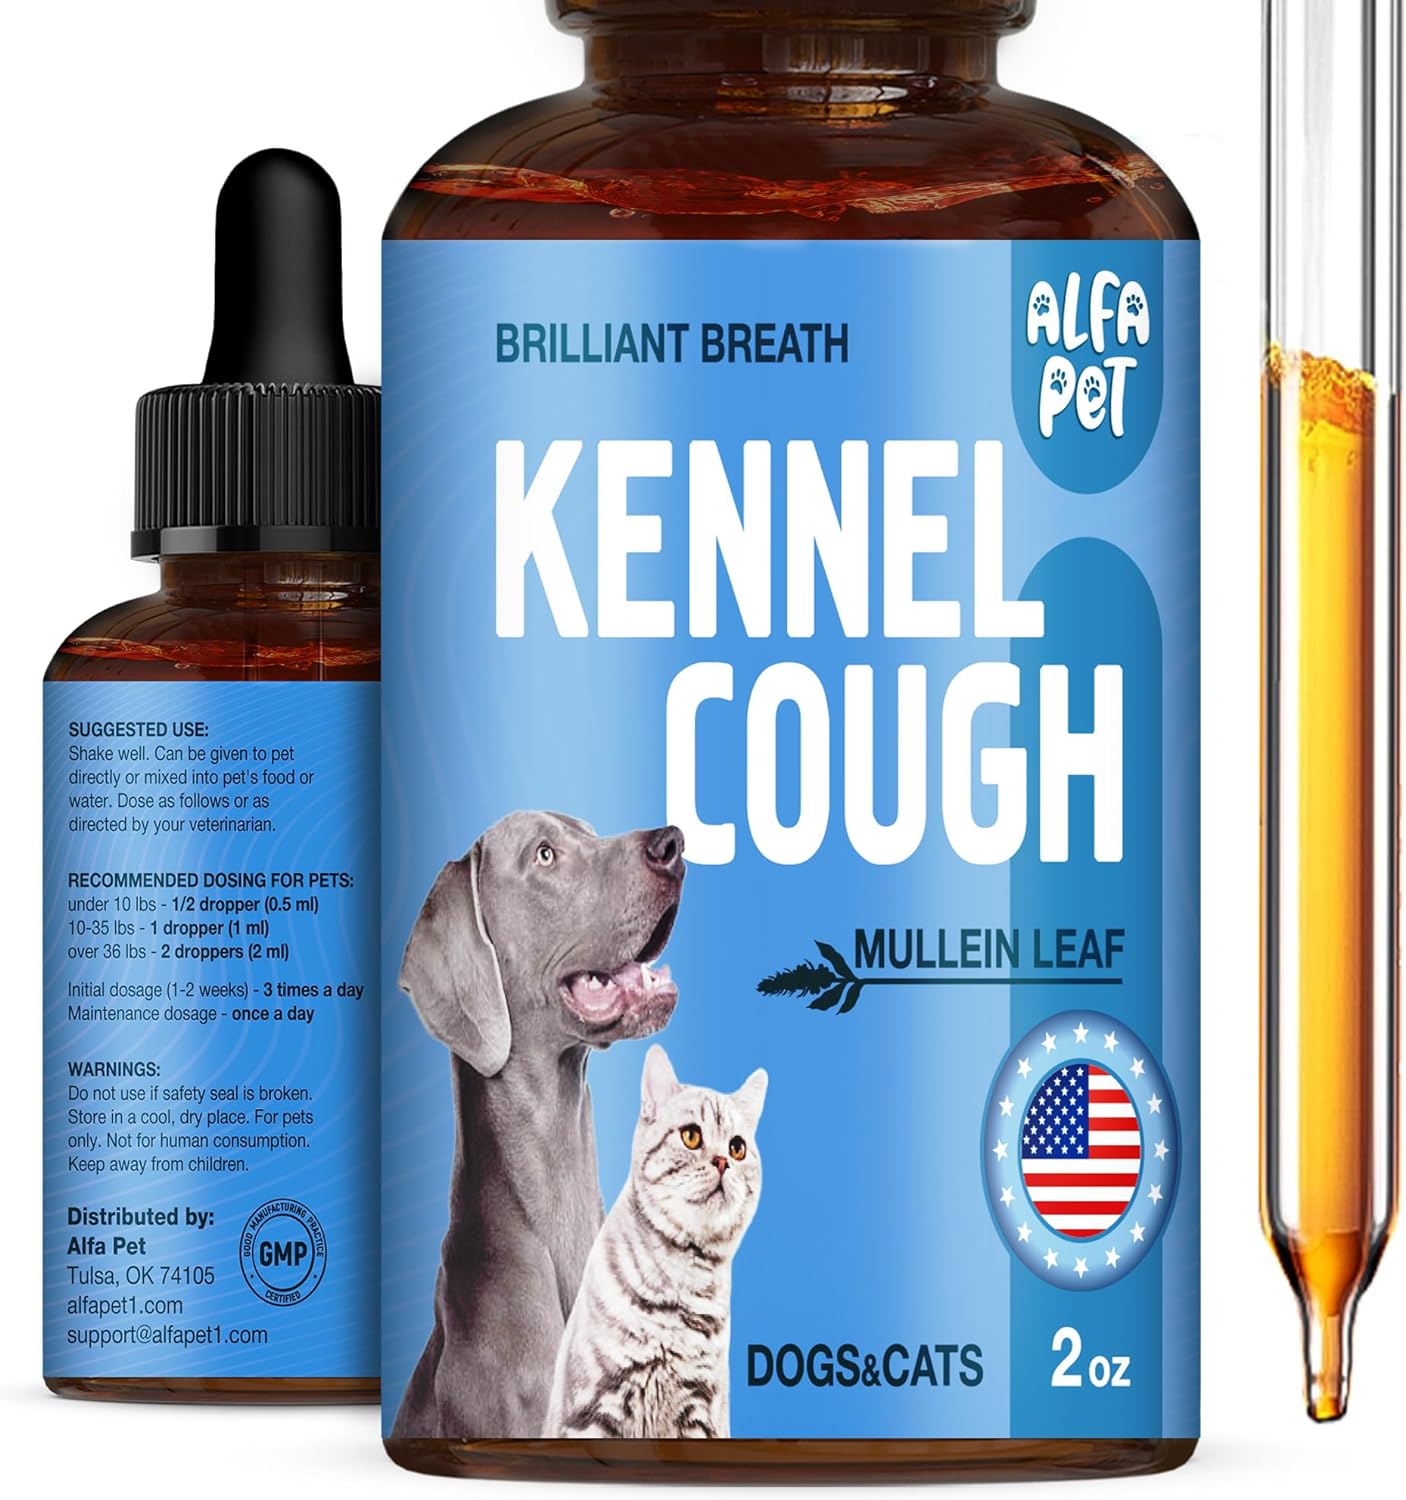 Dog Cough - Kennel Cough - Dog Allergy Relief - Supplements for Dogs & Cats Health - Allergy Relief Immune Supplement for Dogs - for Dry, Wet & Barkly